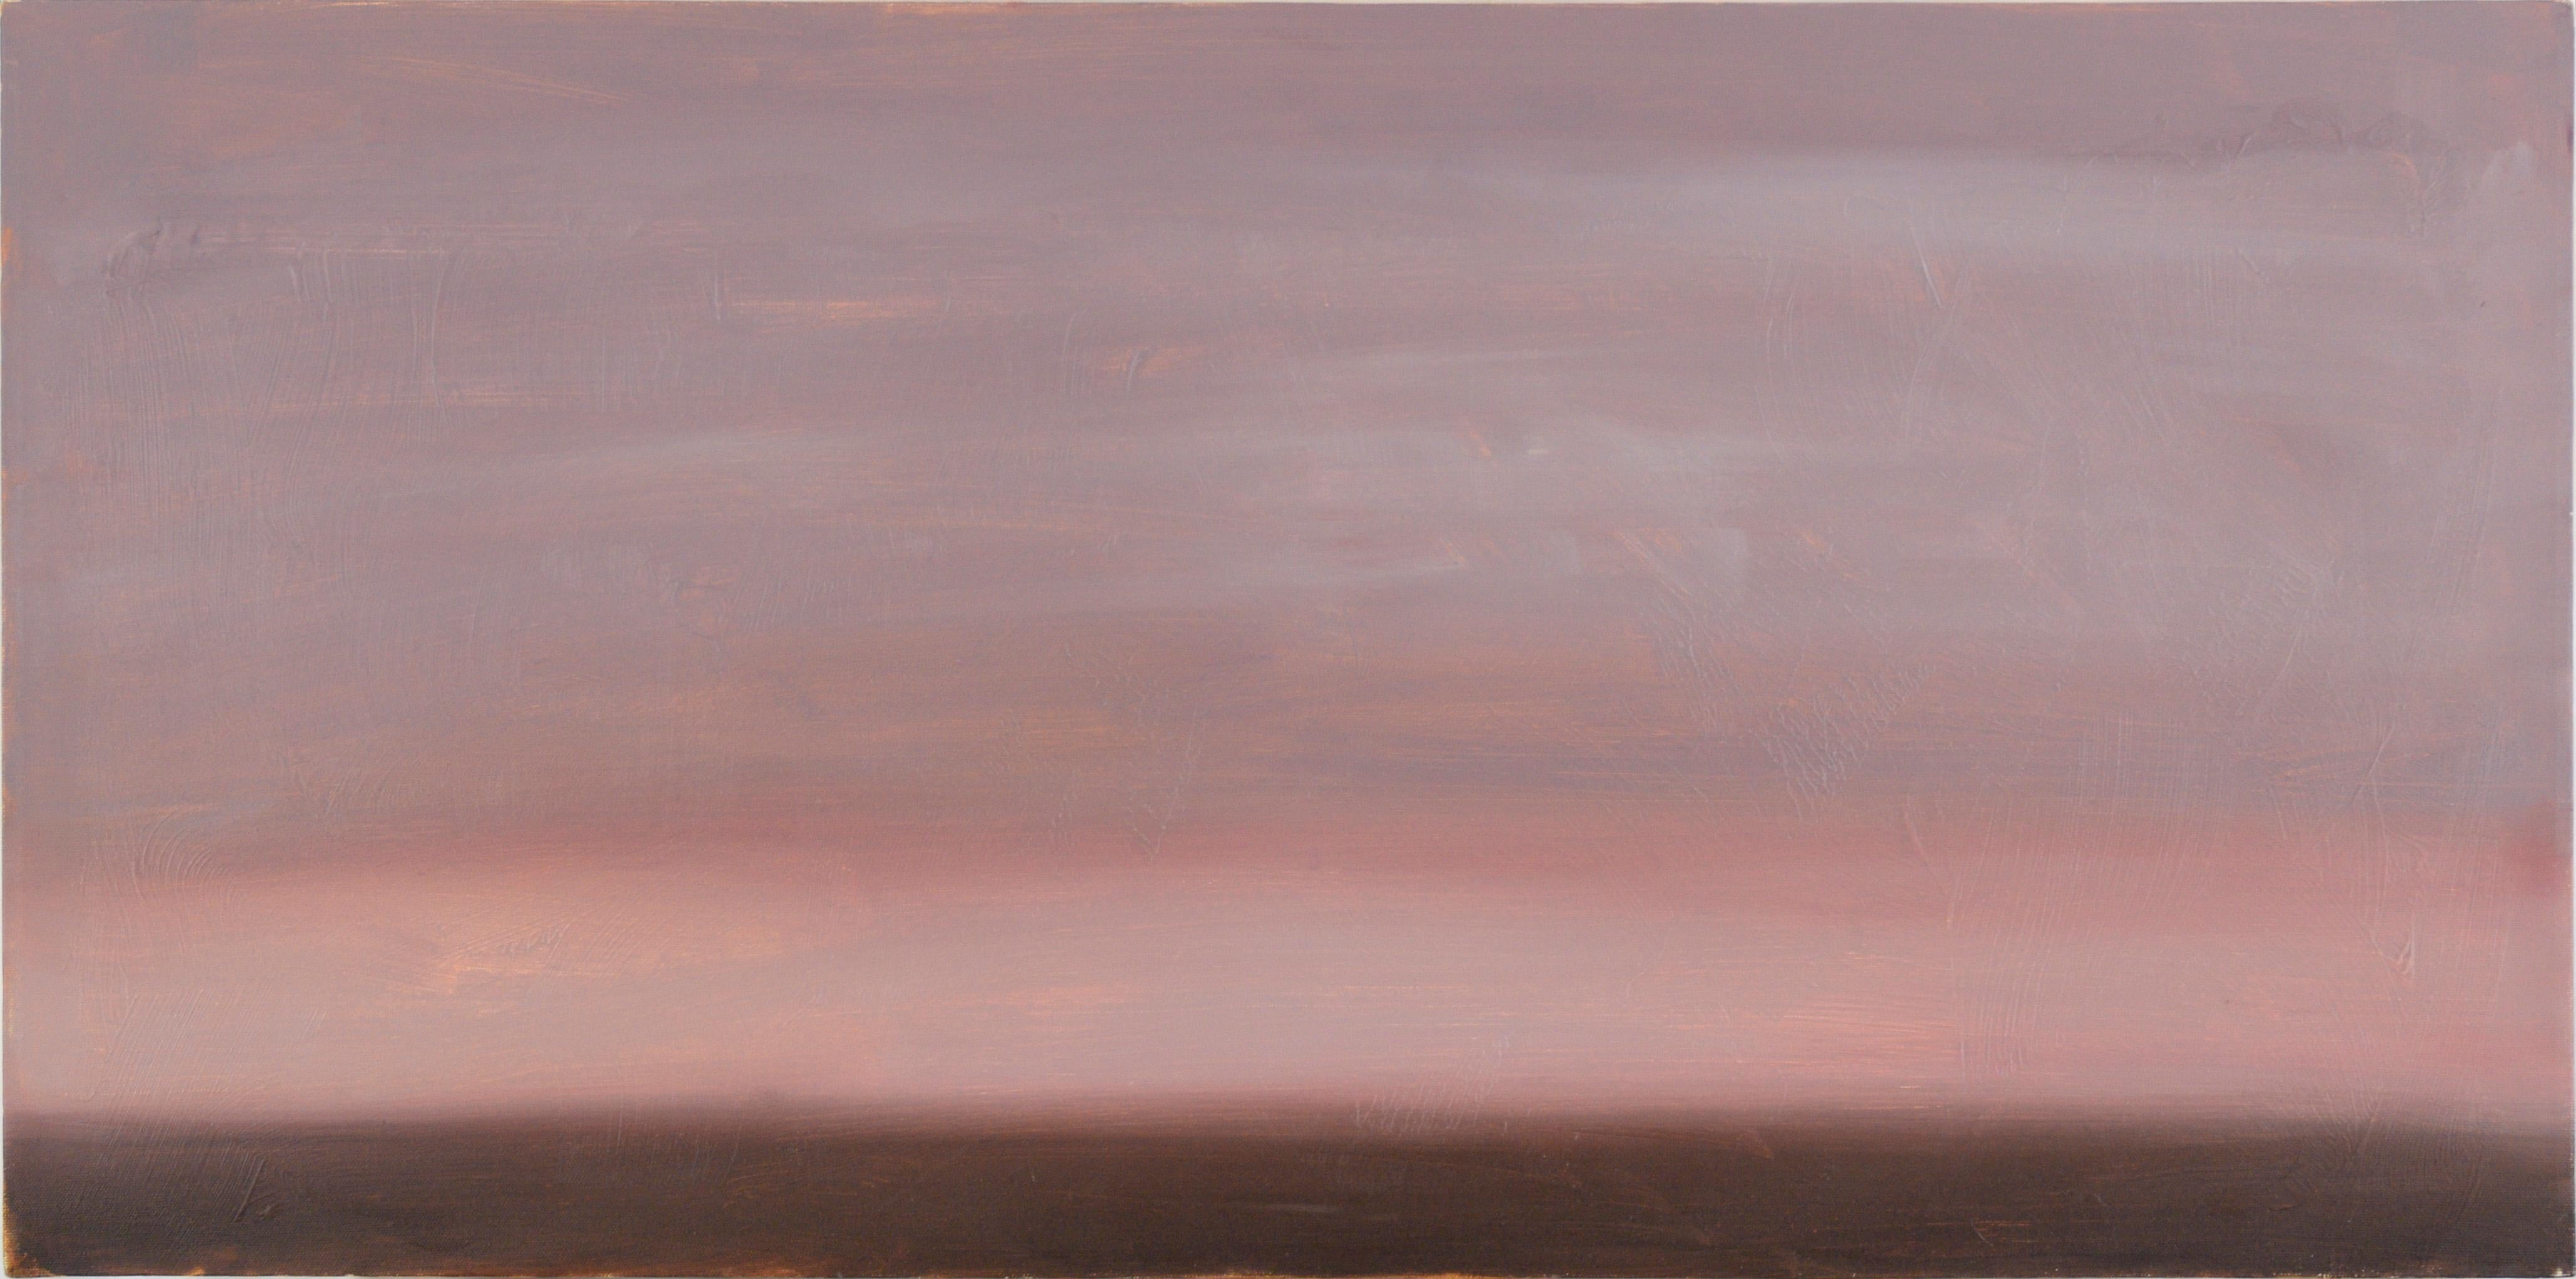 Unknown Landscape Painting - Hazy Purple and Pink Minimalist Landscape in Acrylic on Canvas